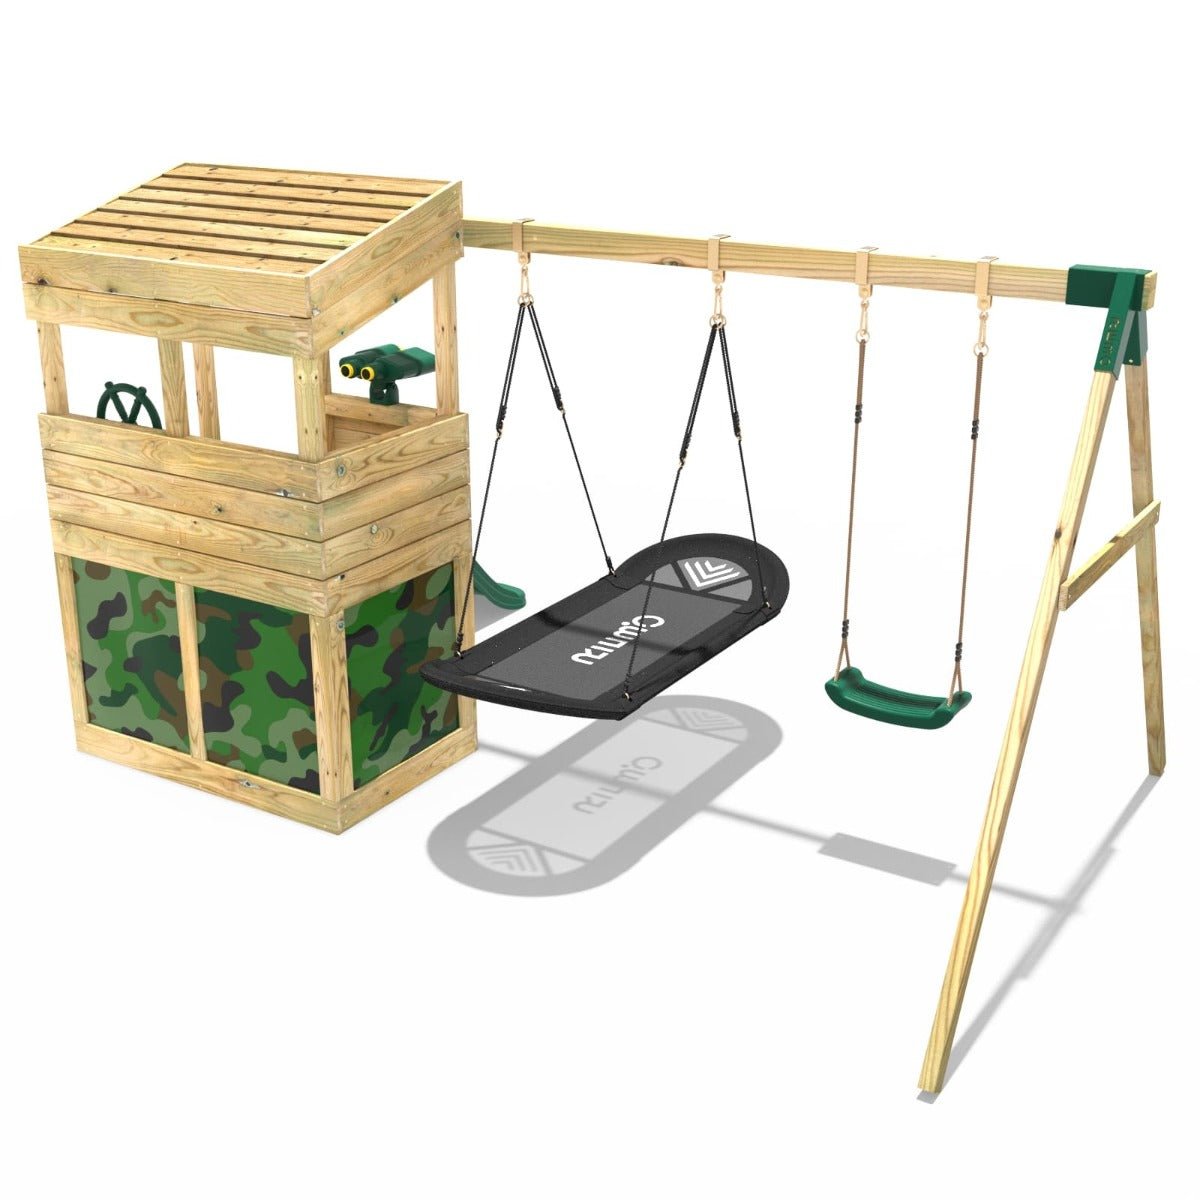 Rebo Wooden Lookout Tower Playhouse with 6ft Slide & Swing - Yosemite Camouflage